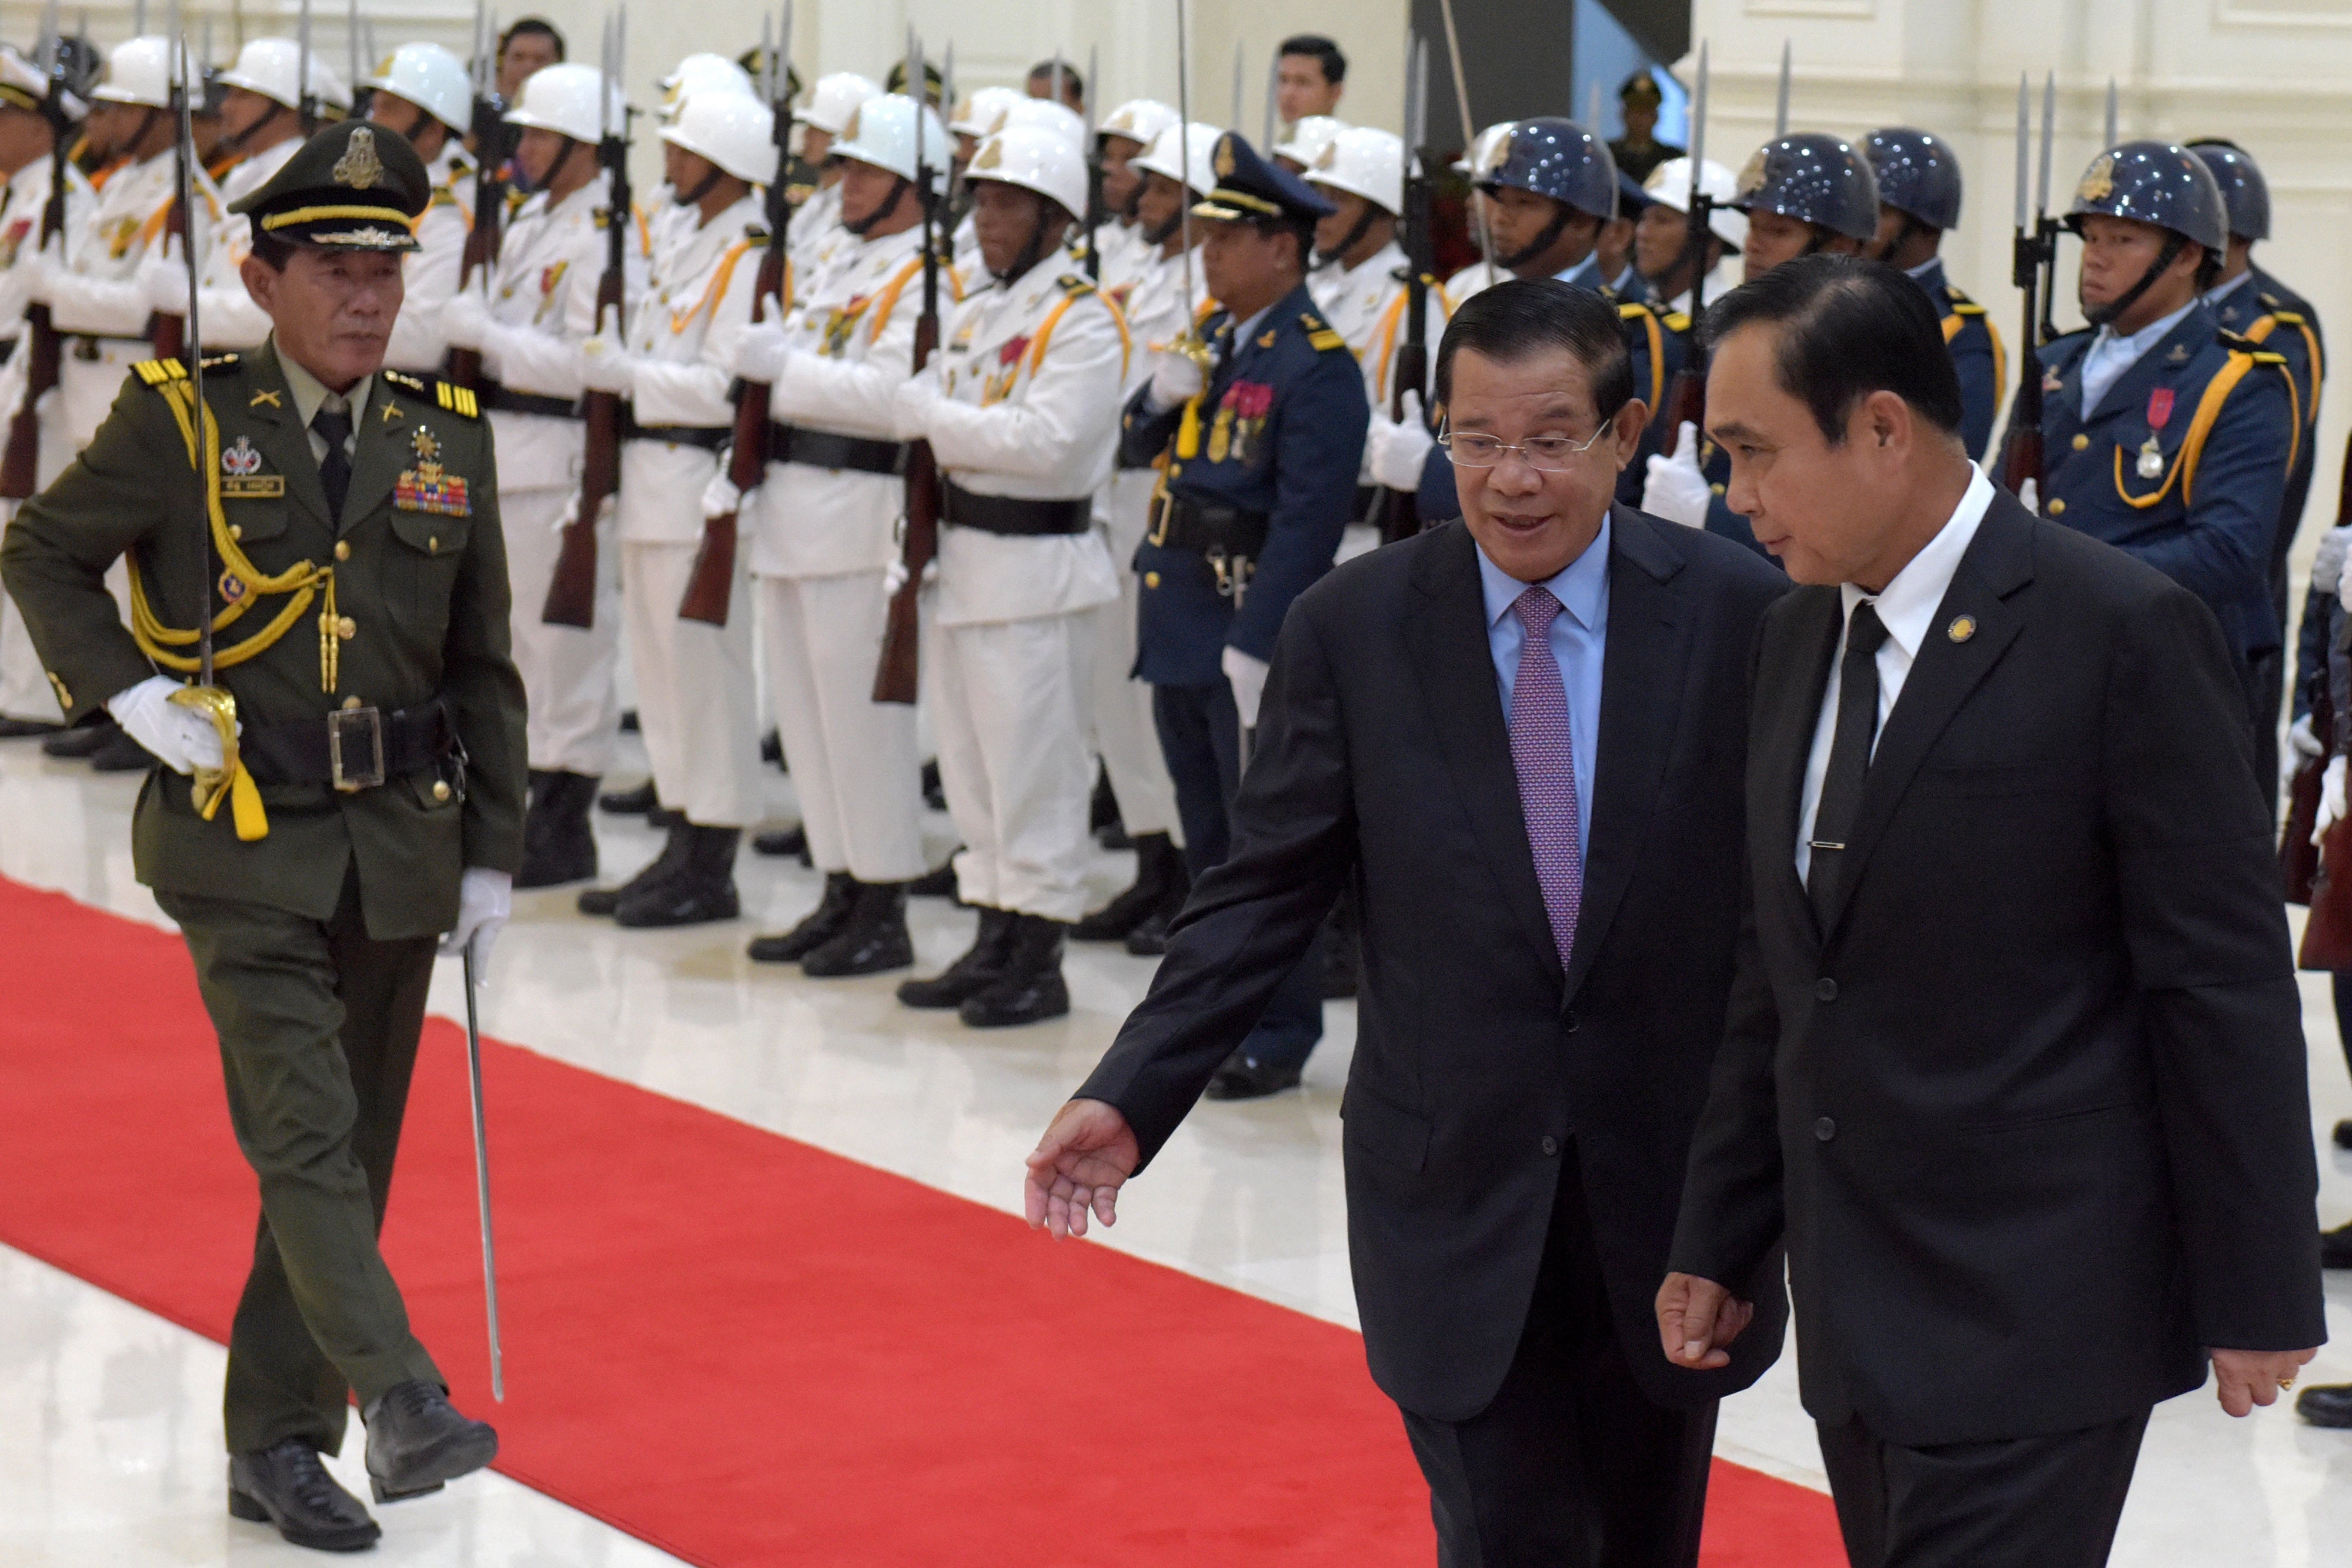 Thai Prime Minister Prayut Chan-ocha and Cambodian Prime Minister Hun Sen arrive at the Peace Palace in Phnom Penh, Cambodia on September 7, 2017.